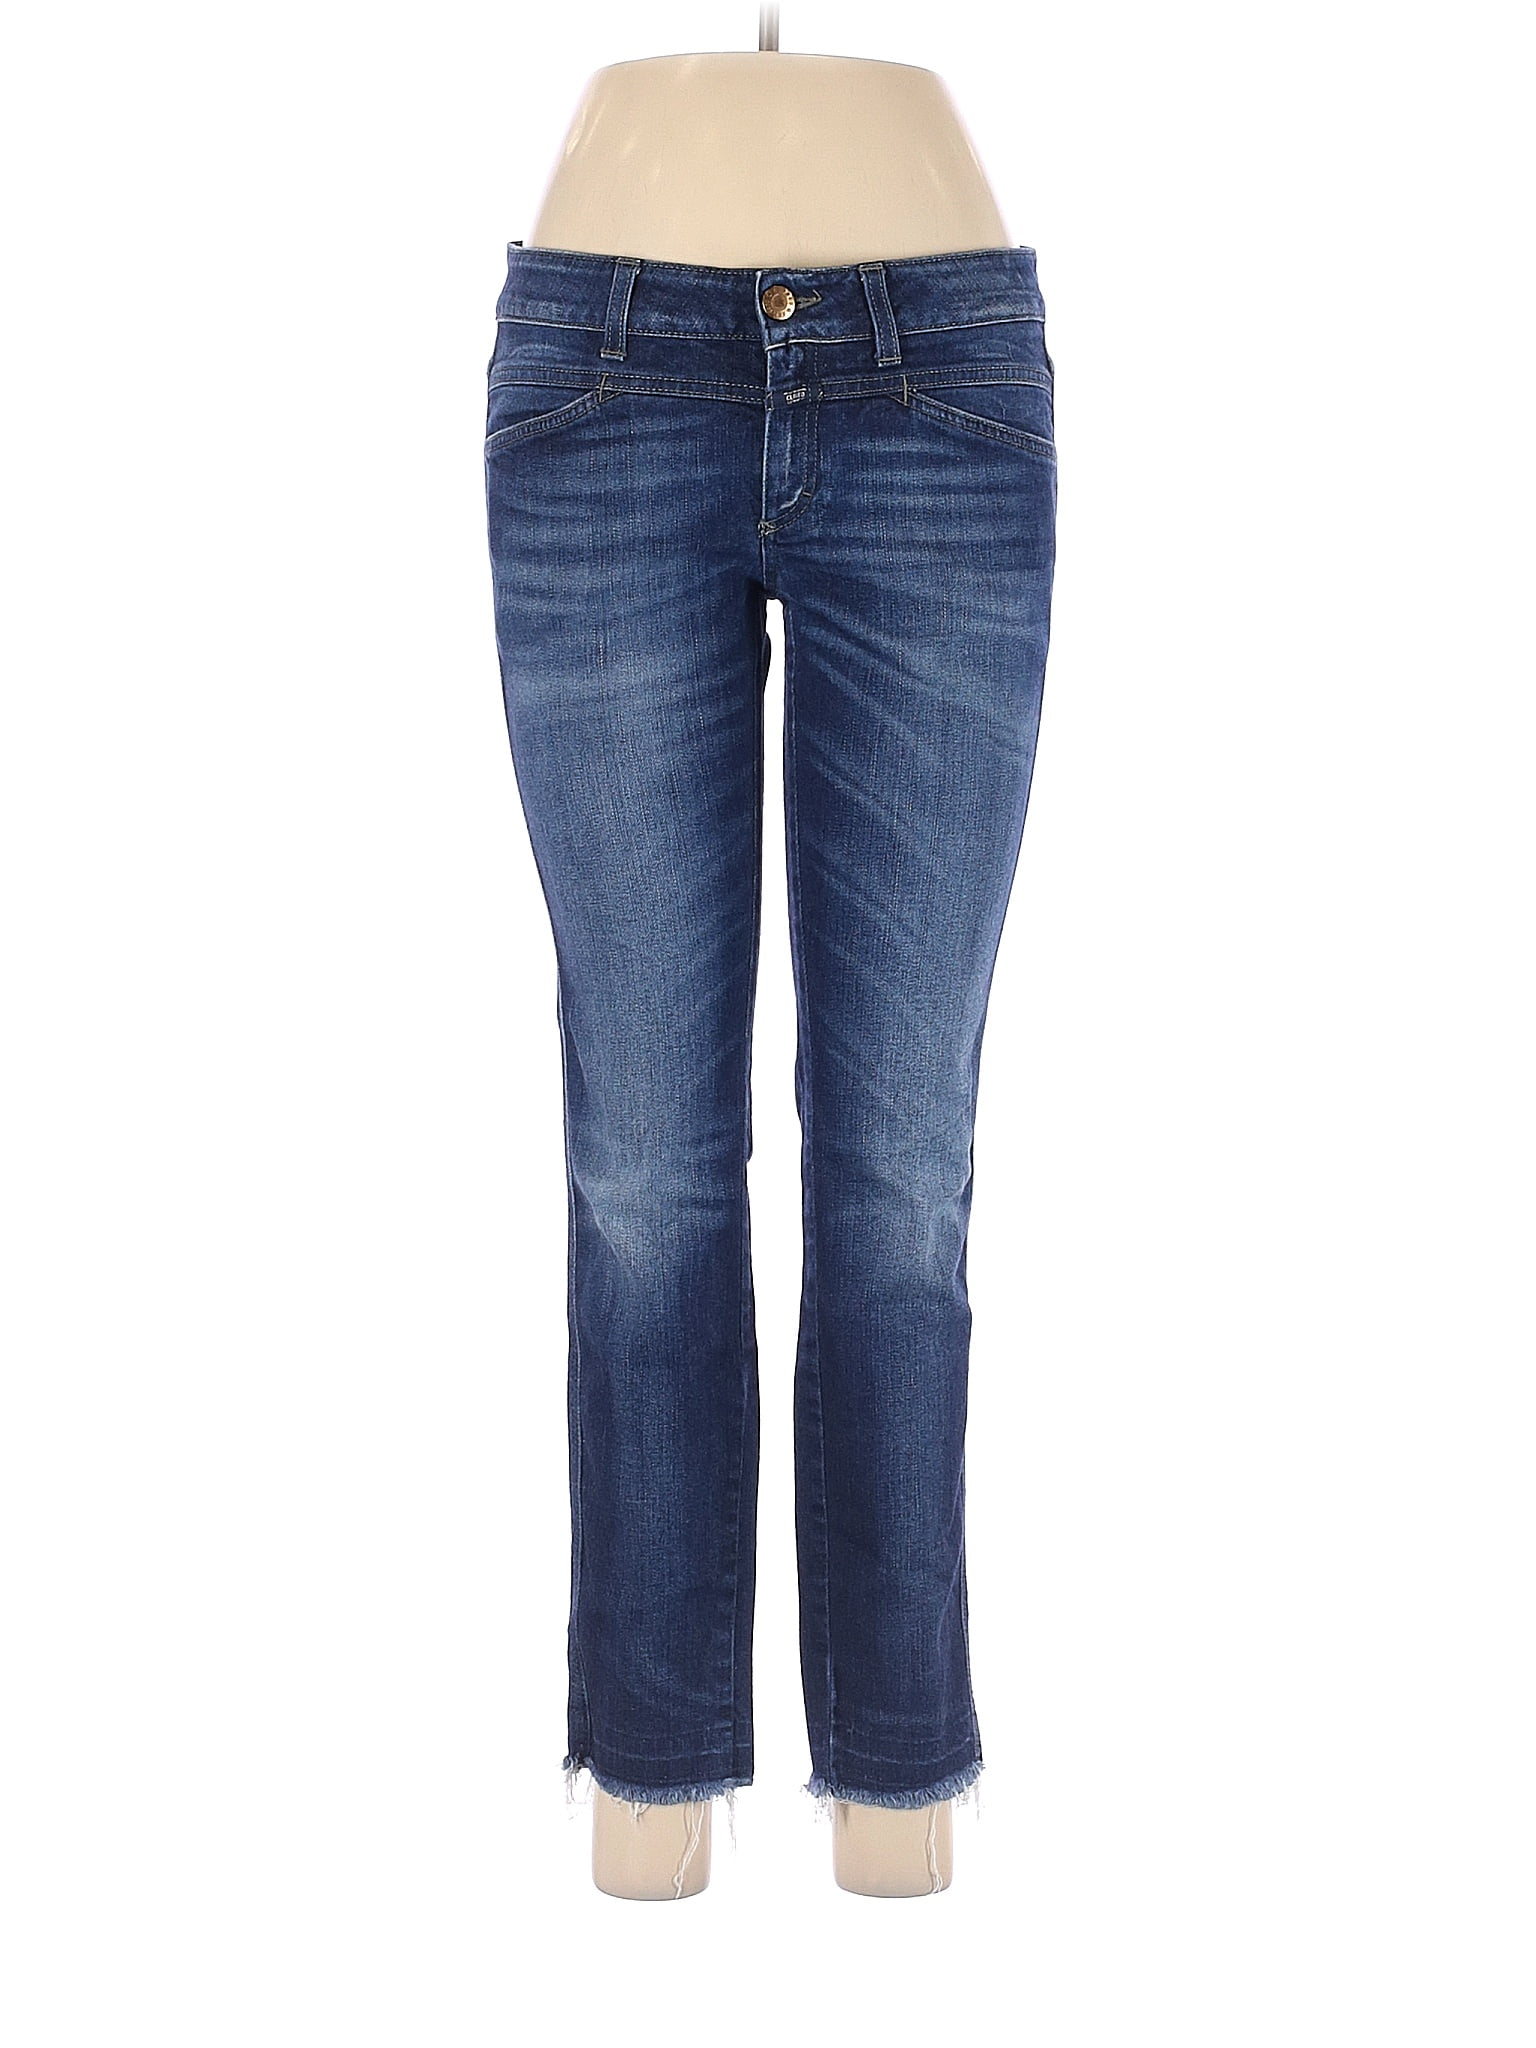 Closed Solid Blue Jeans 28 Waist - 81% off | thredUP